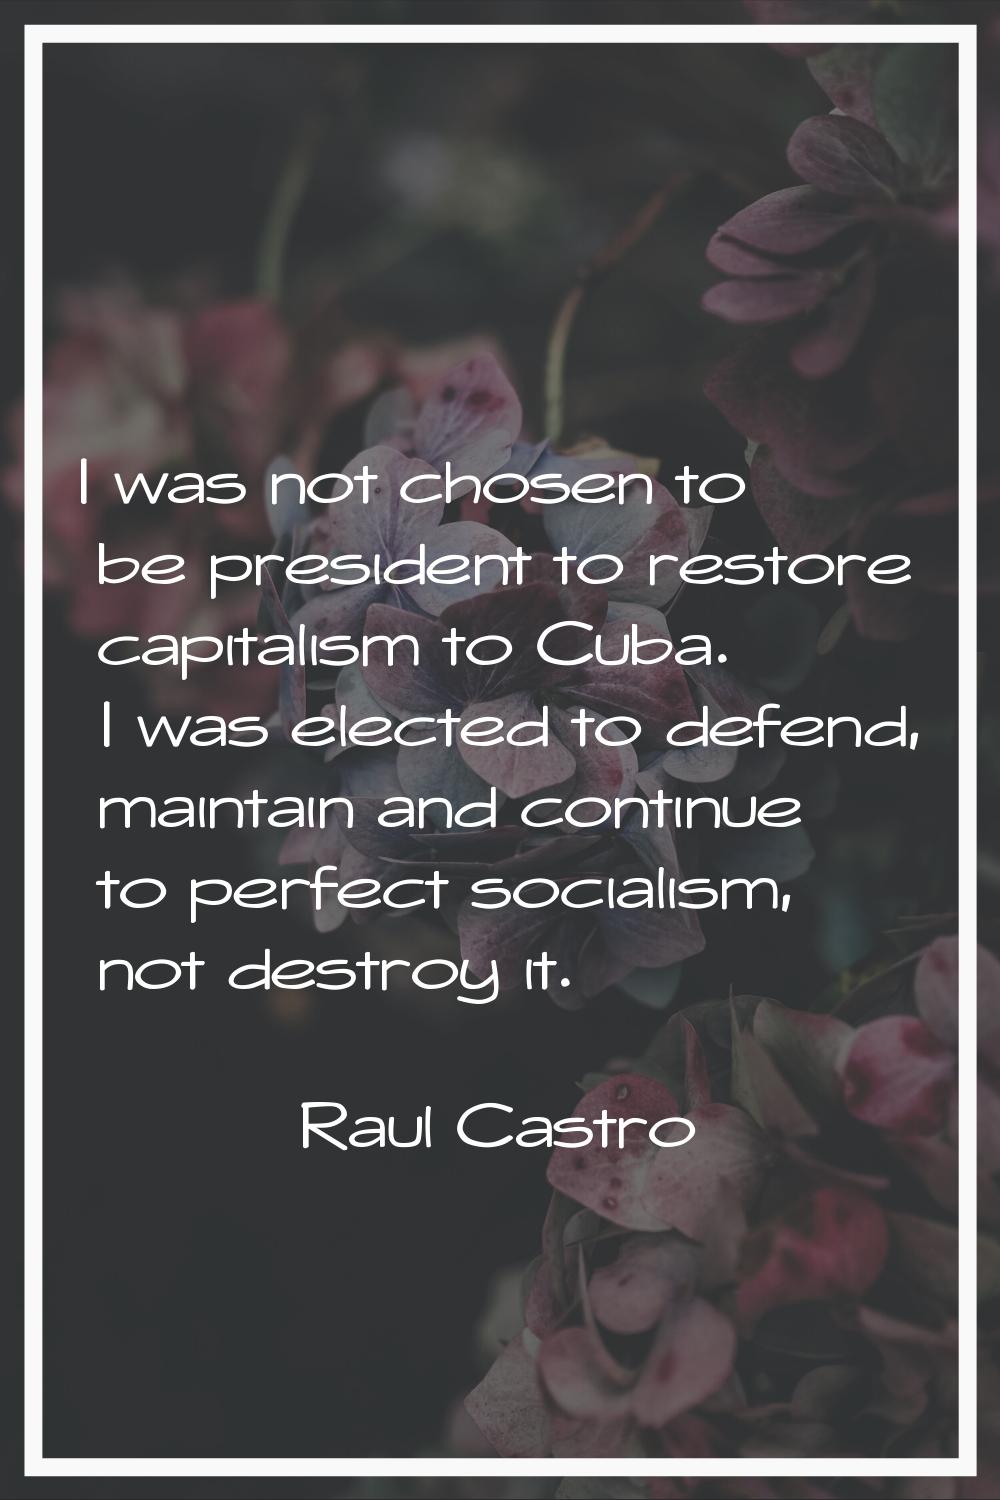 I was not chosen to be president to restore capitalism to Cuba. I was elected to defend, maintain a